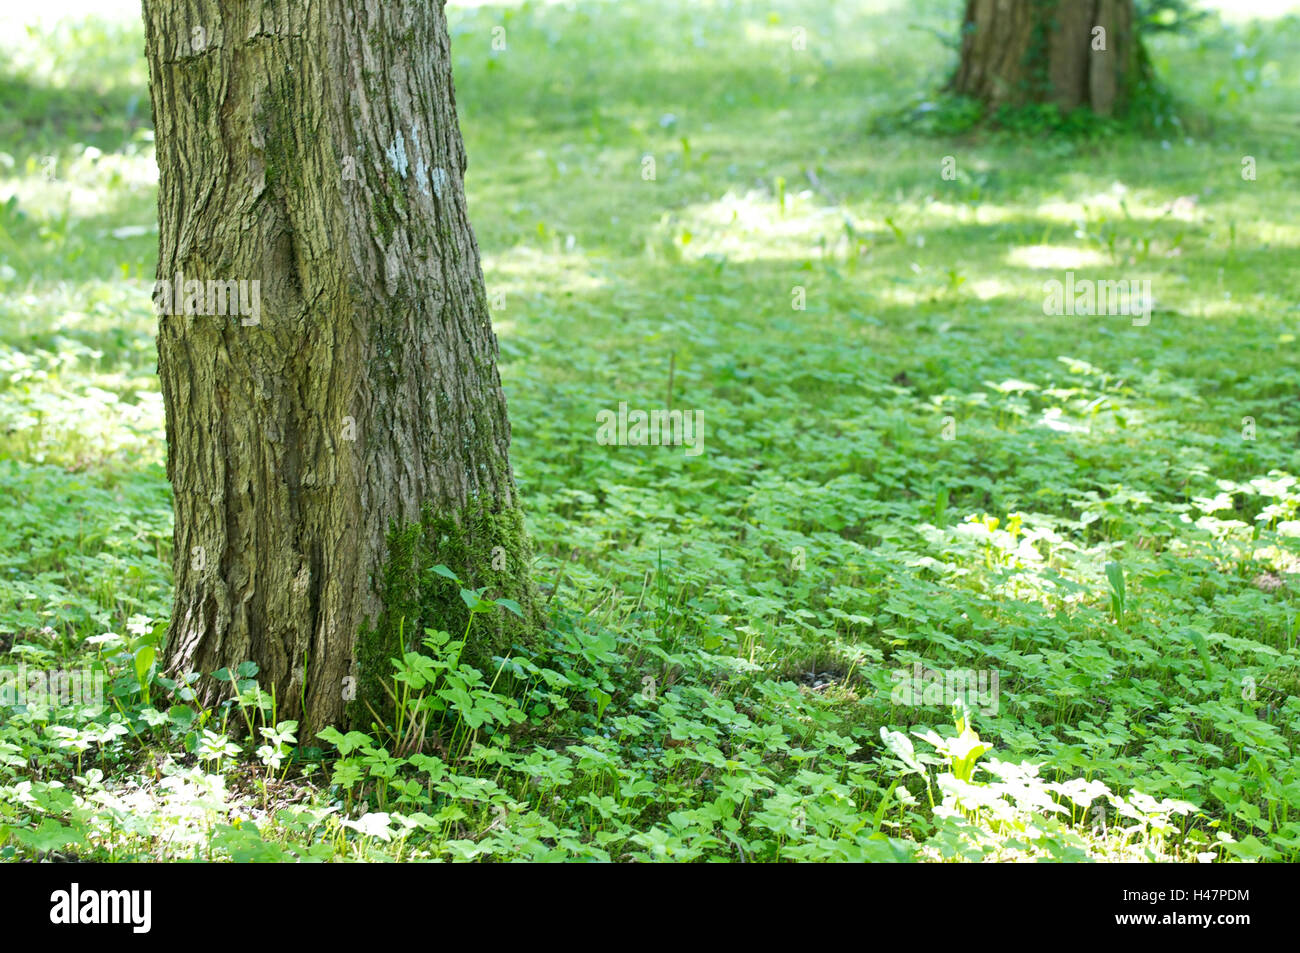 Two trunks on vegetated clearing, detail, Stock Photo